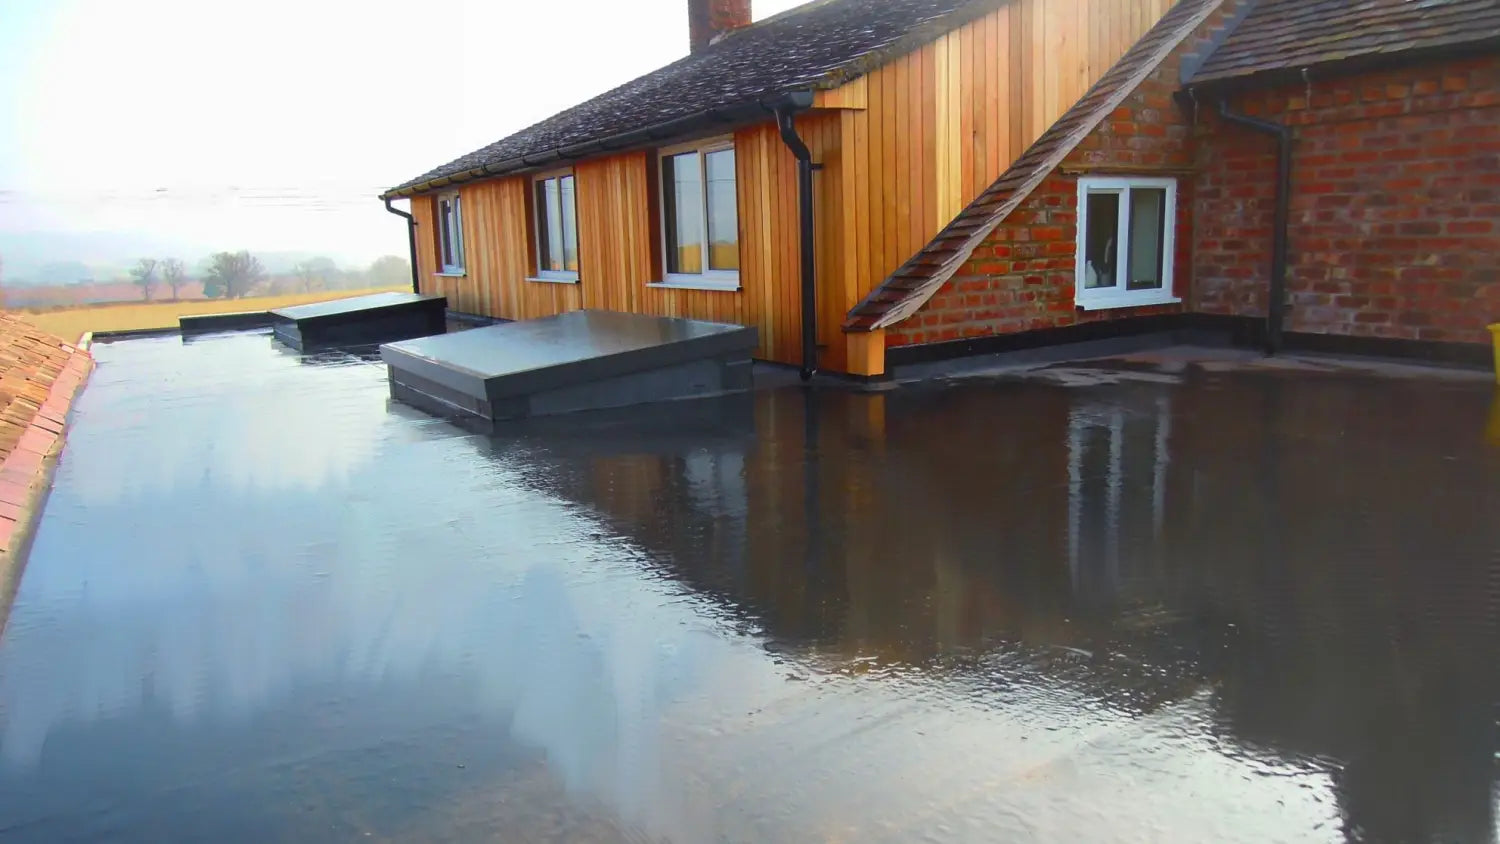 ClassicBond Compatible Products The Original EPDM Flat Roofing System The ClassicBond EPDM system is great for large or small flat roof areas and is normally bonded onto a timber deck in one piece so no joins are required!